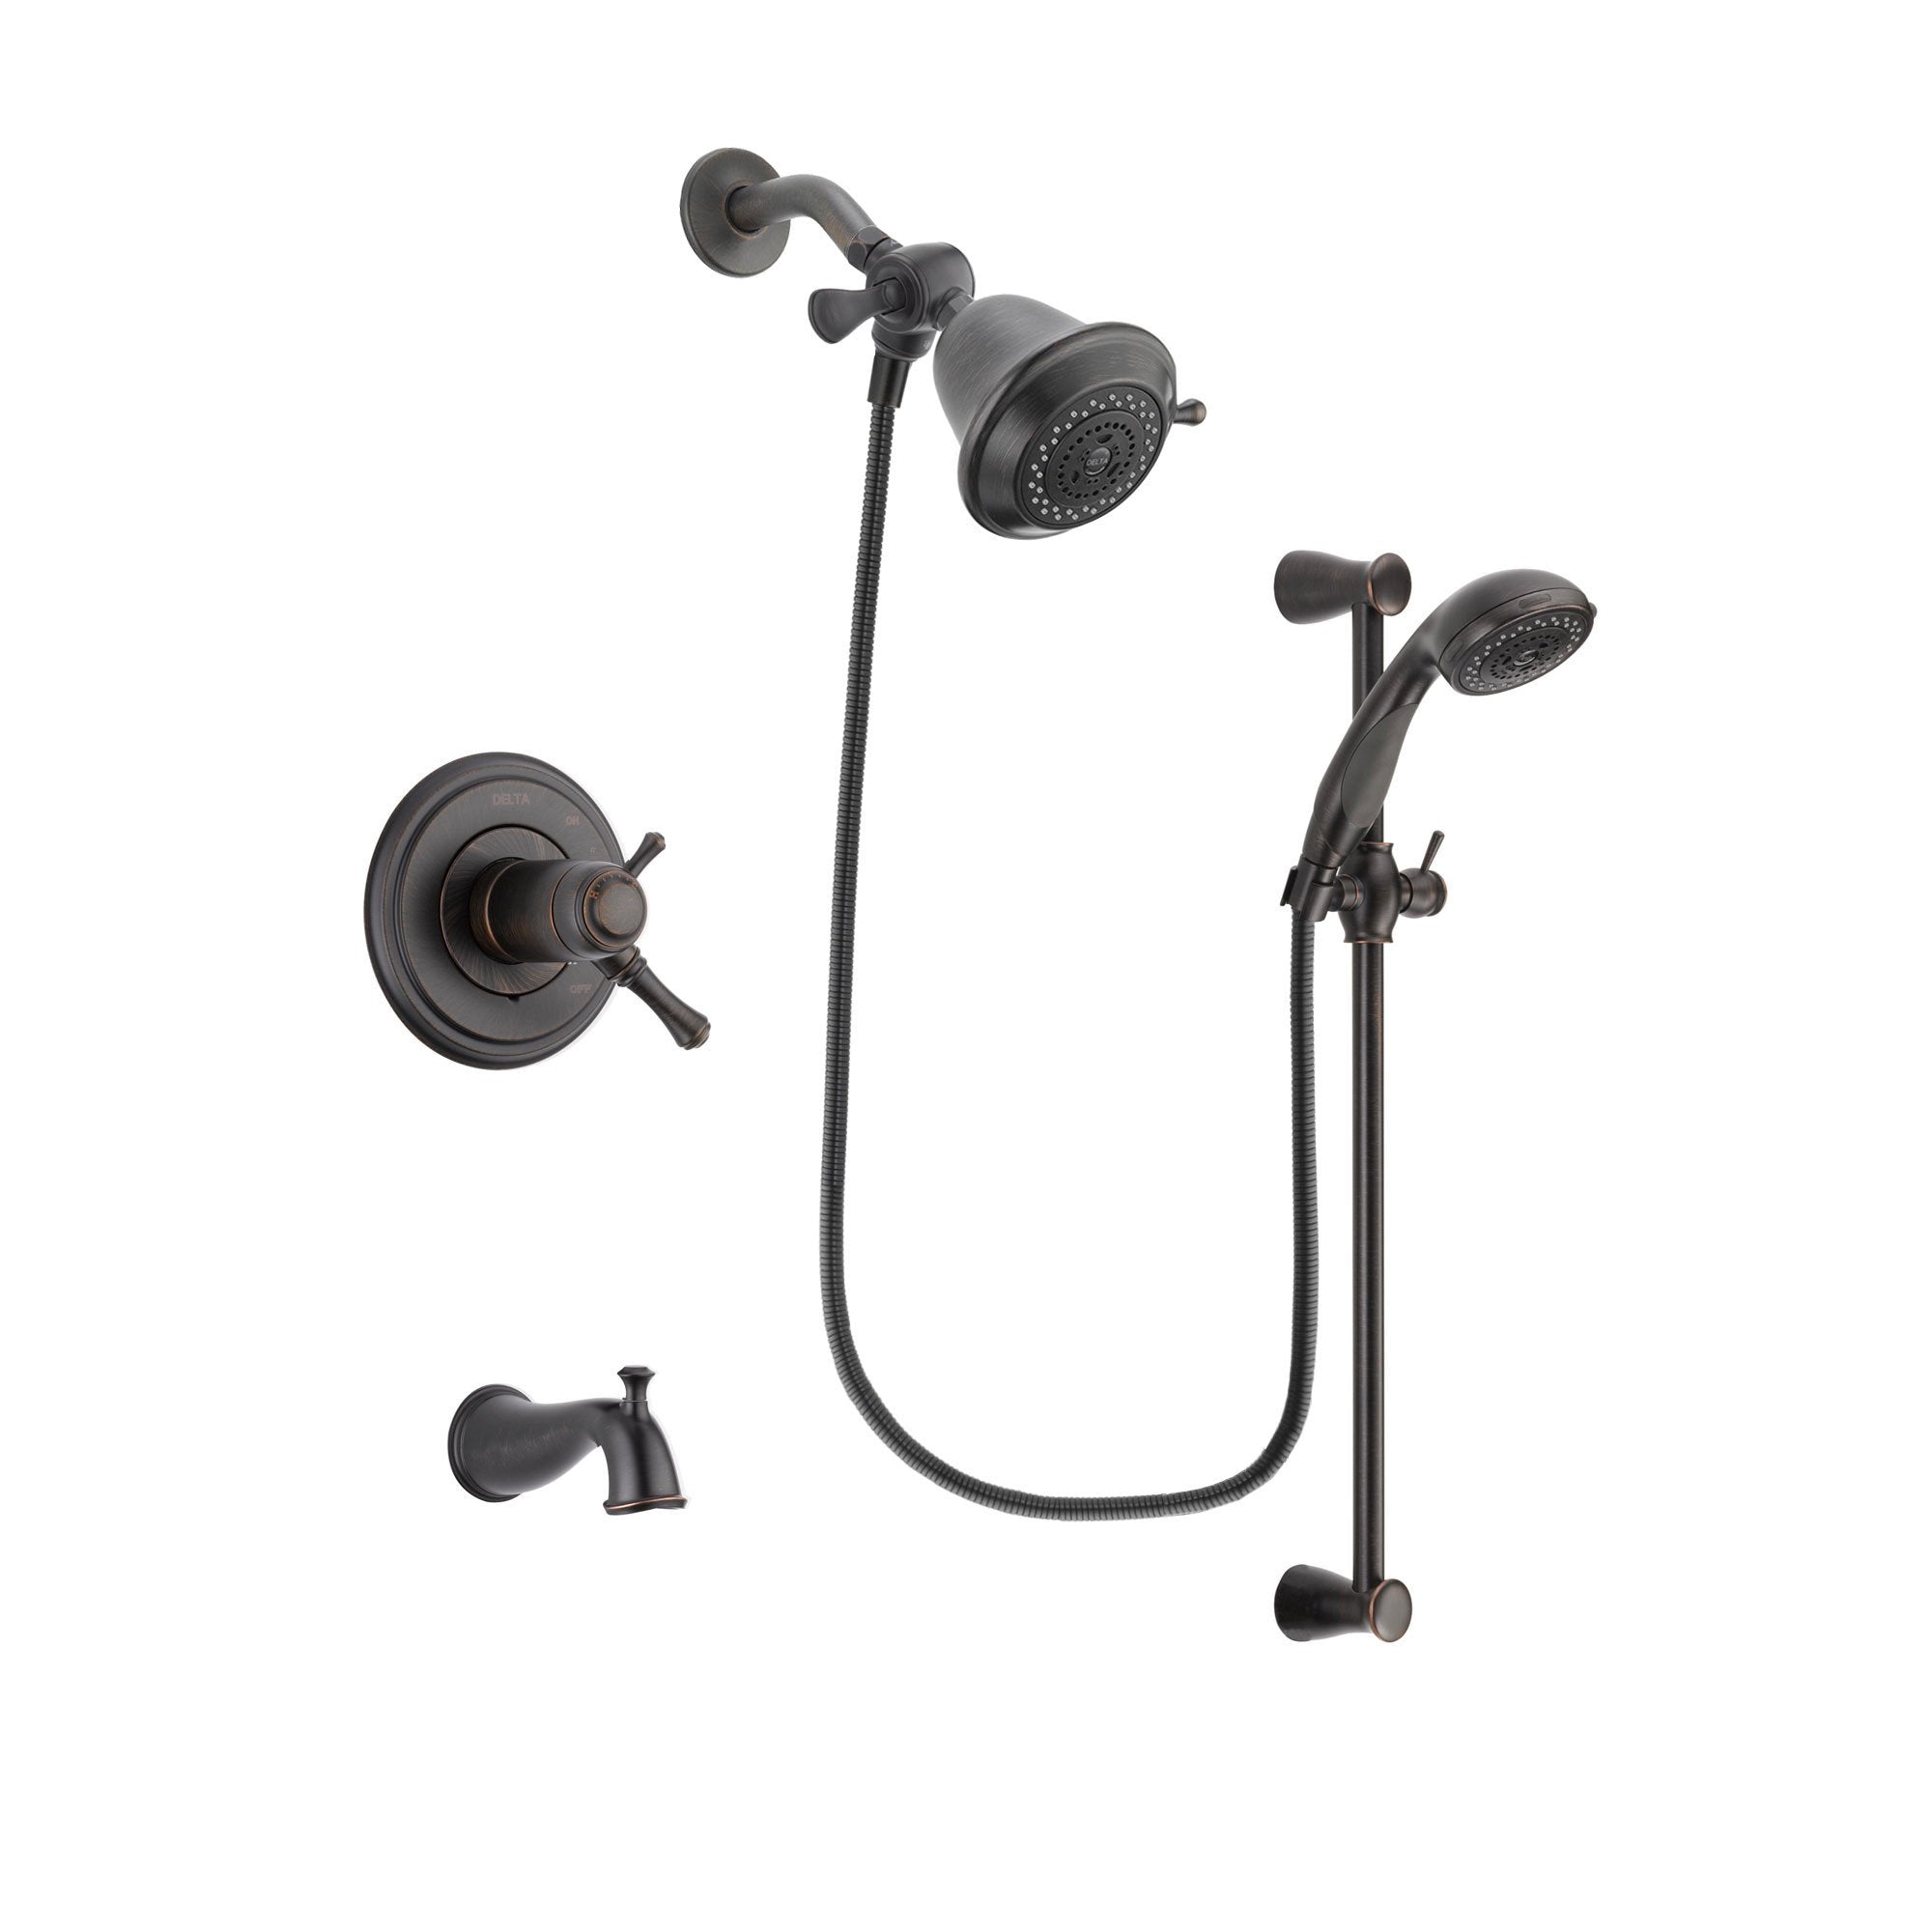 Delta Cassidy Venetian Bronze Finish Thermostatic Tub and Shower Faucet System Package with Shower Head and Personal Handheld Shower Spray with Slide Bar Includes Rough-in Valve and Tub Spout DSP2629V